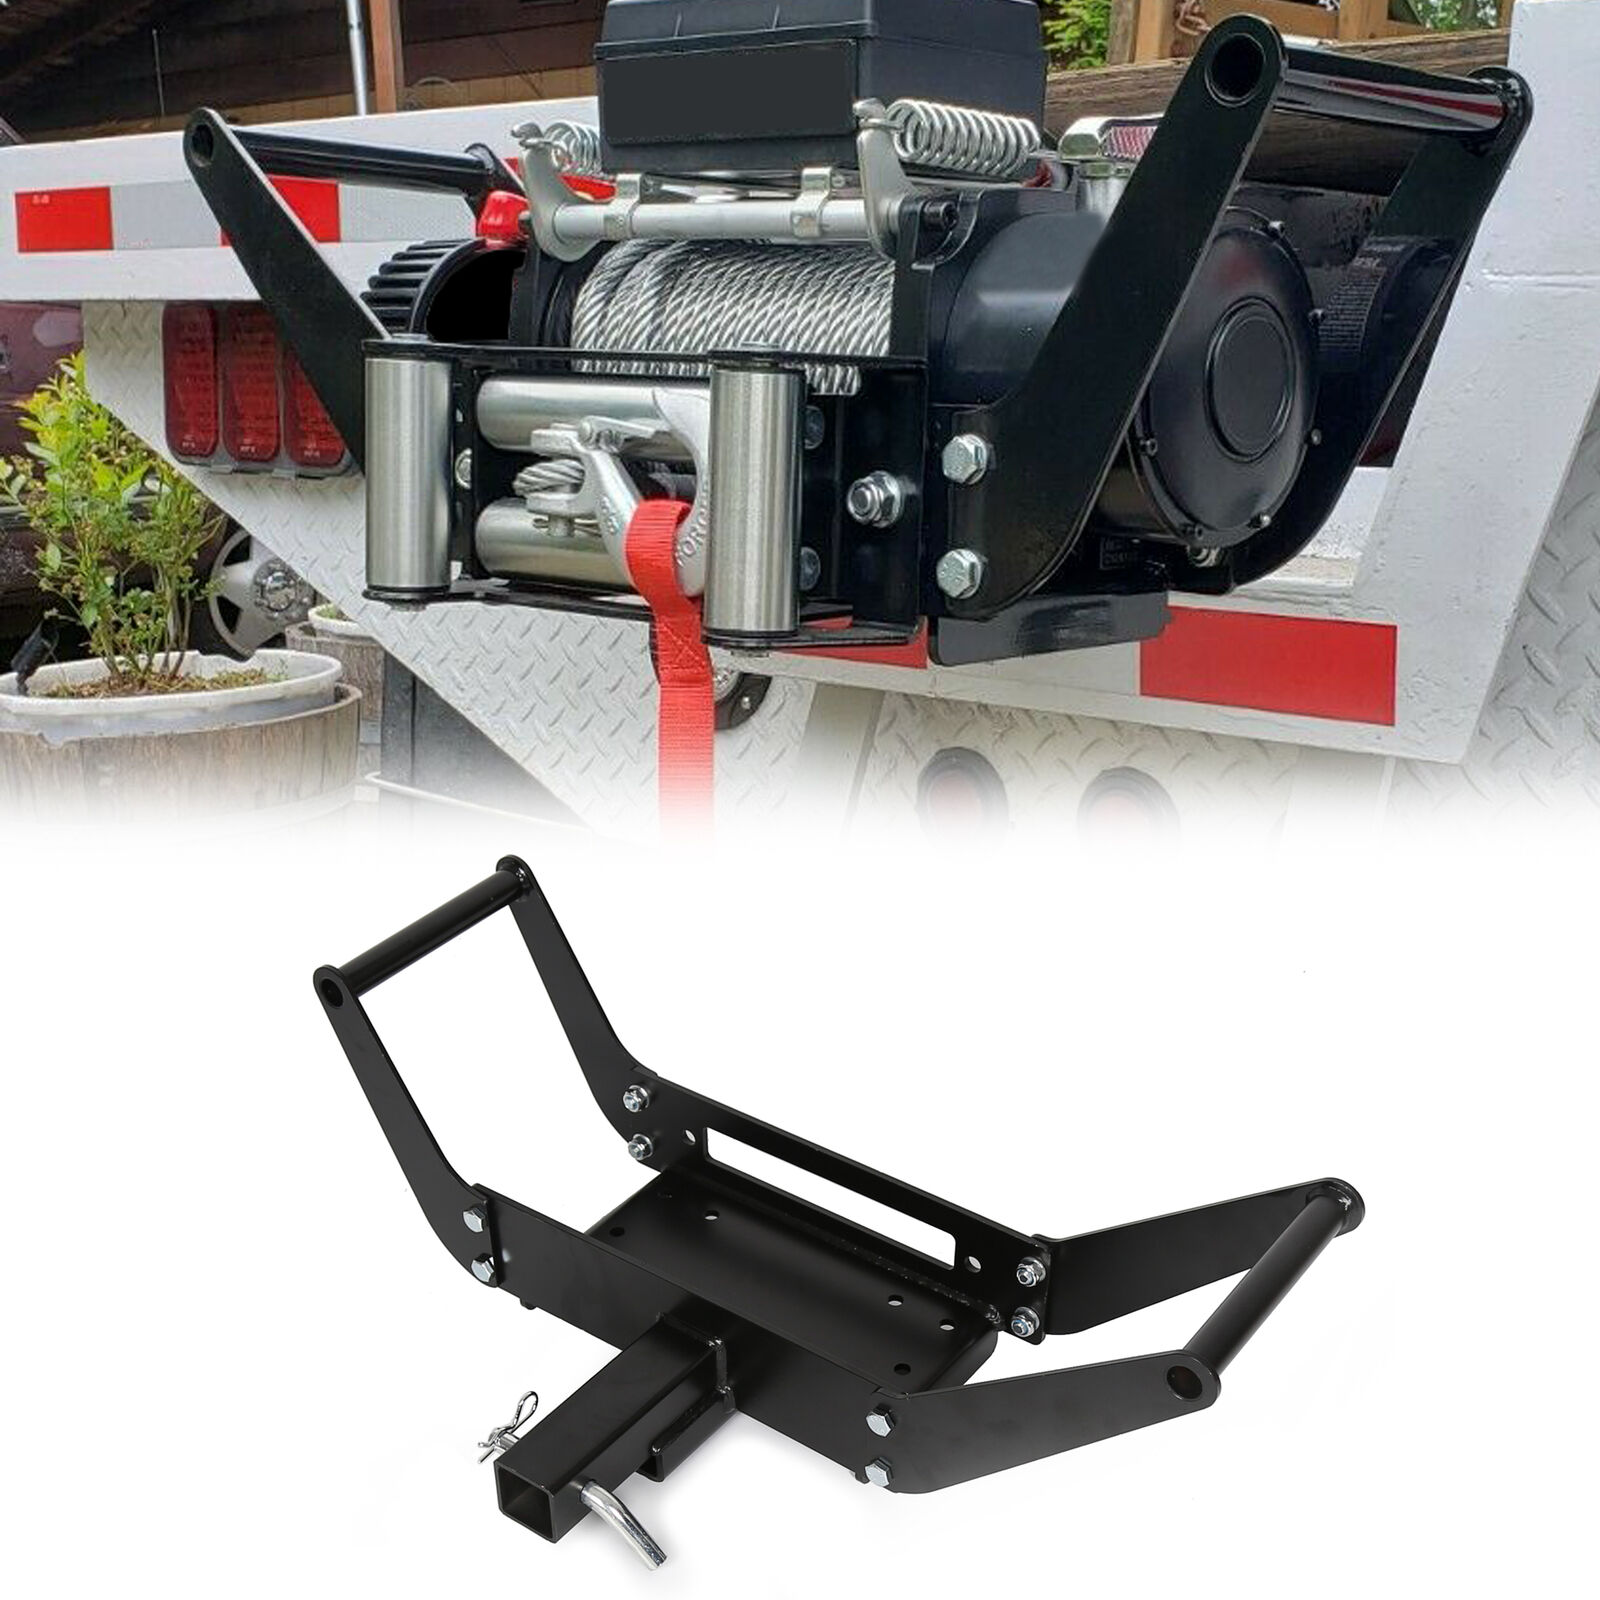 BUNKER INDUST Receiver Hitch Winch Cradle Mount Plate Universal 2 Trailer Hitch Winch Mounting Bracket for ATV UTV Truck 